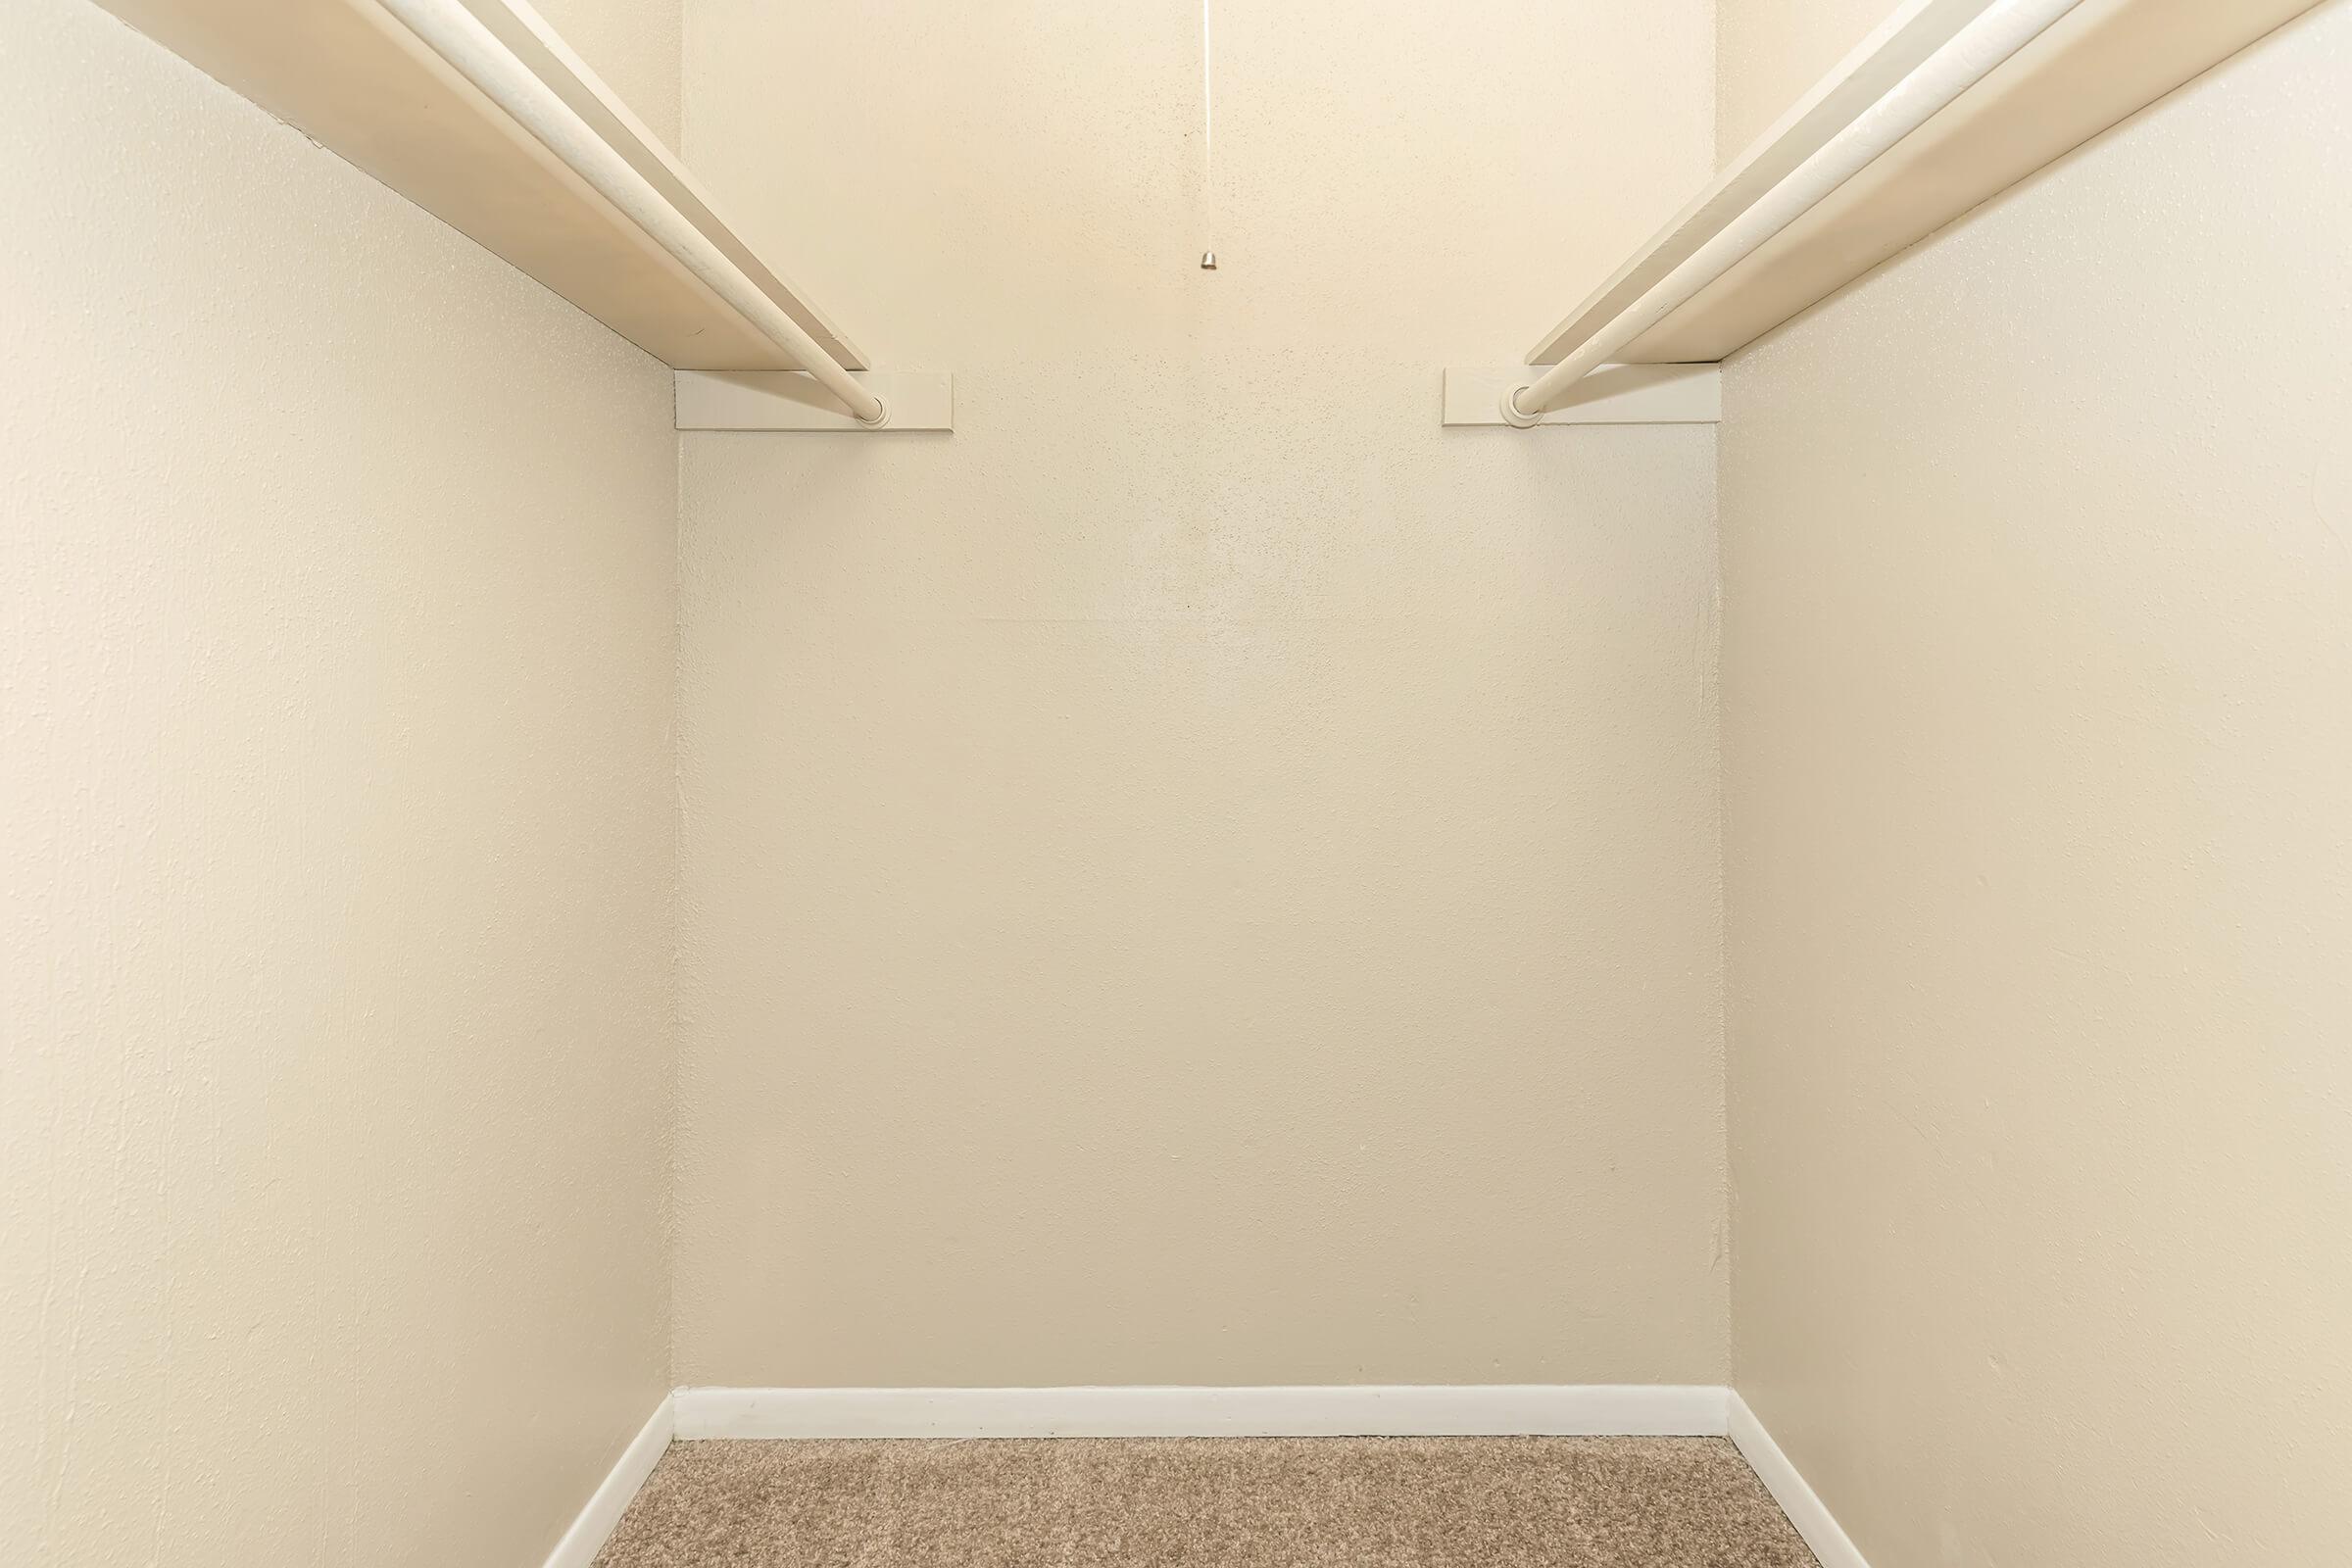 LARGE CLOSETS FOR EXTRA SPACE